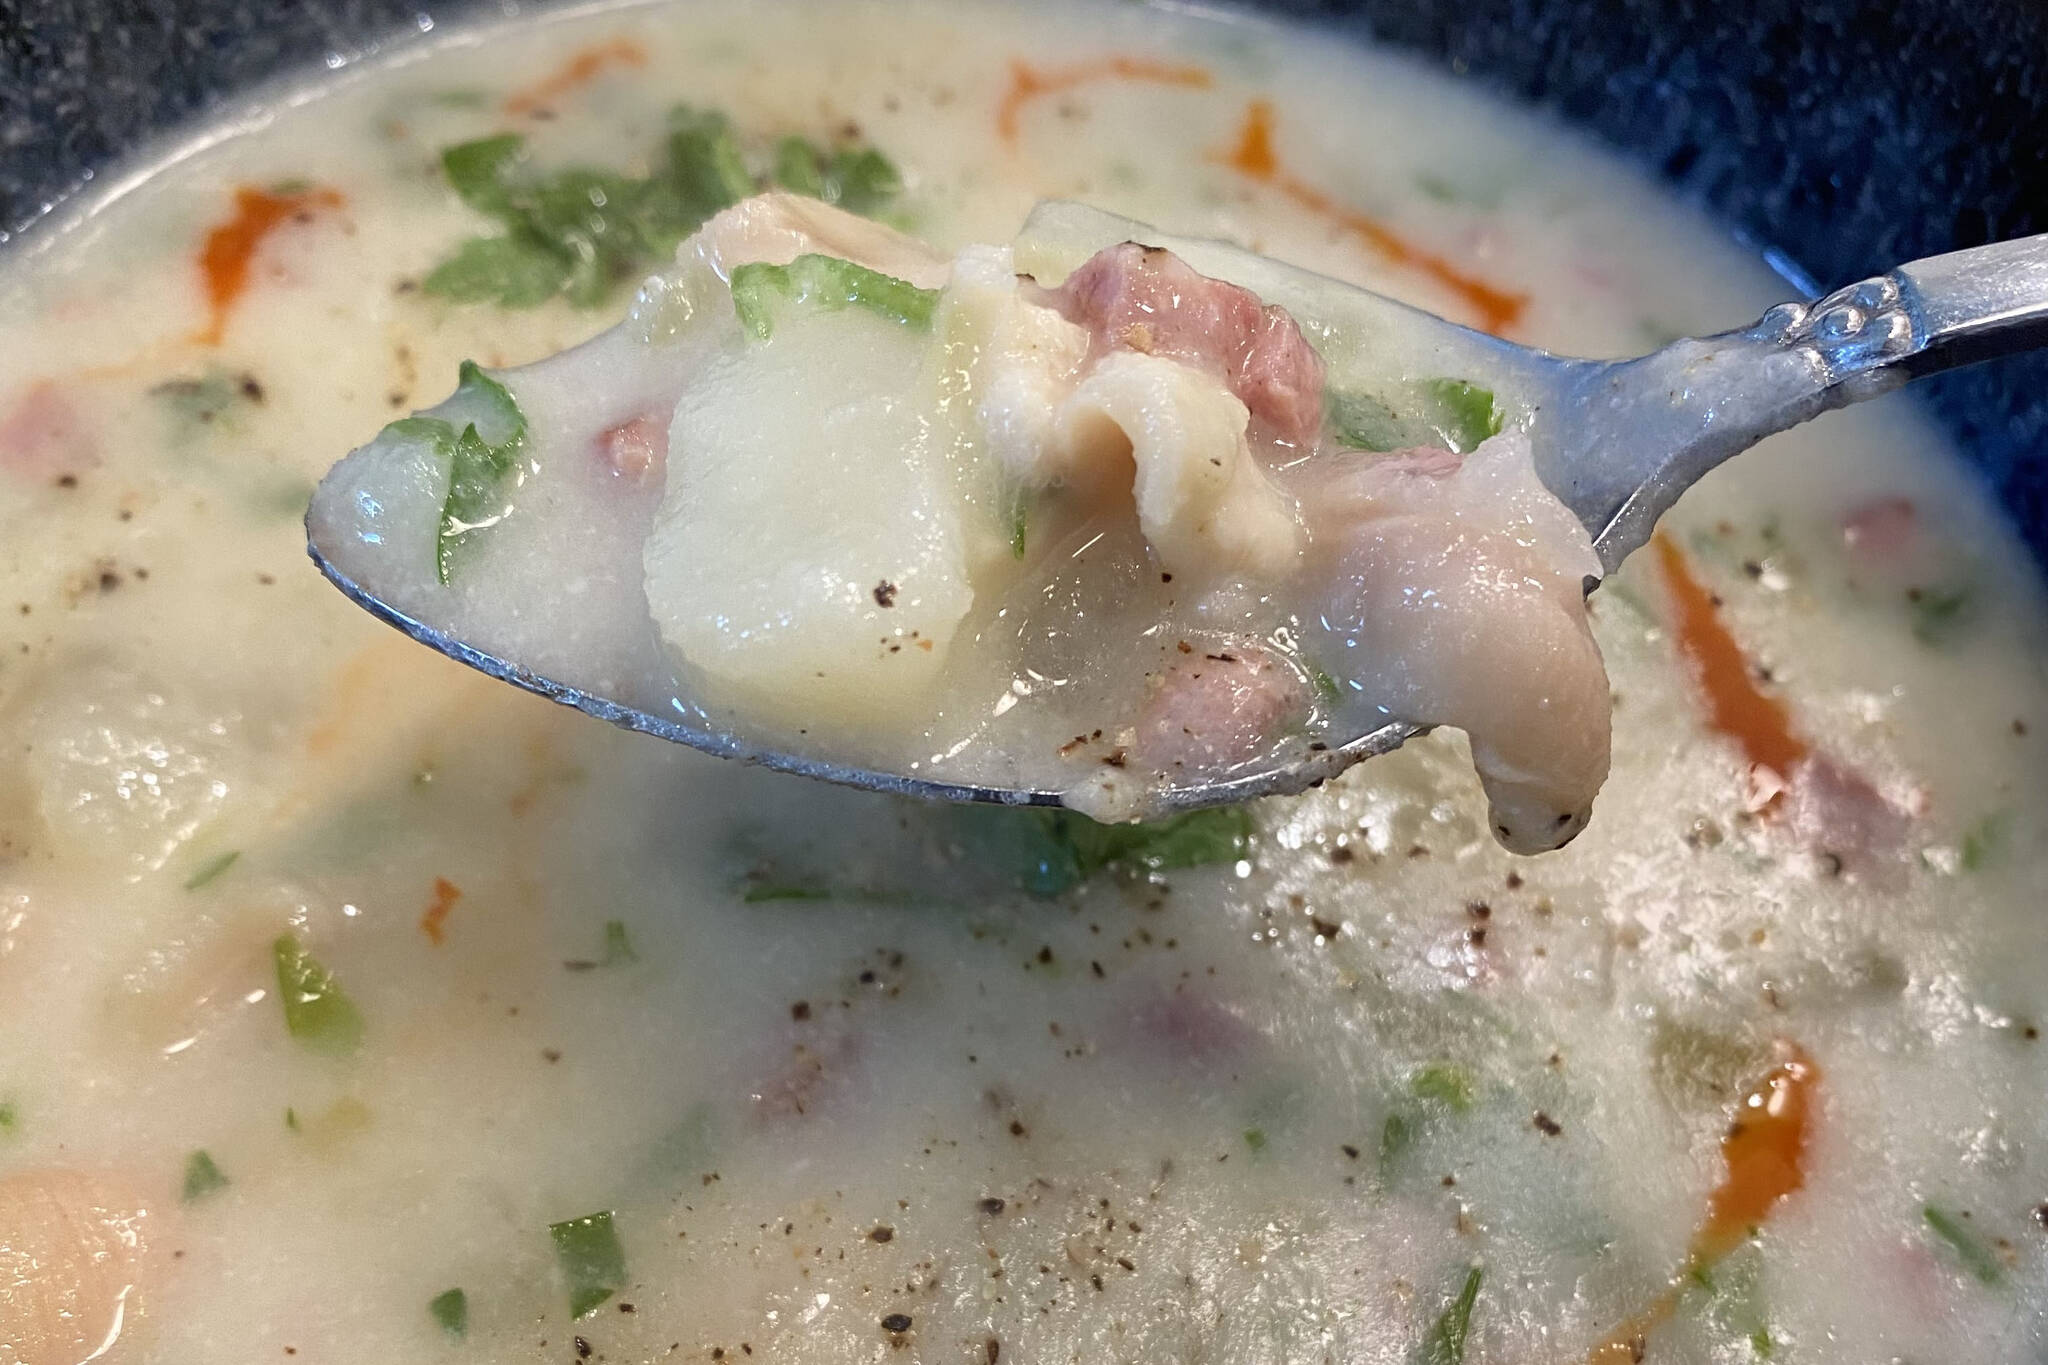 Freshly dug clams are blended into a creamy chowder of potatoes, onions, shallots, meat and spices. (Photo by Tressa Dale/Peninsula Clarion)